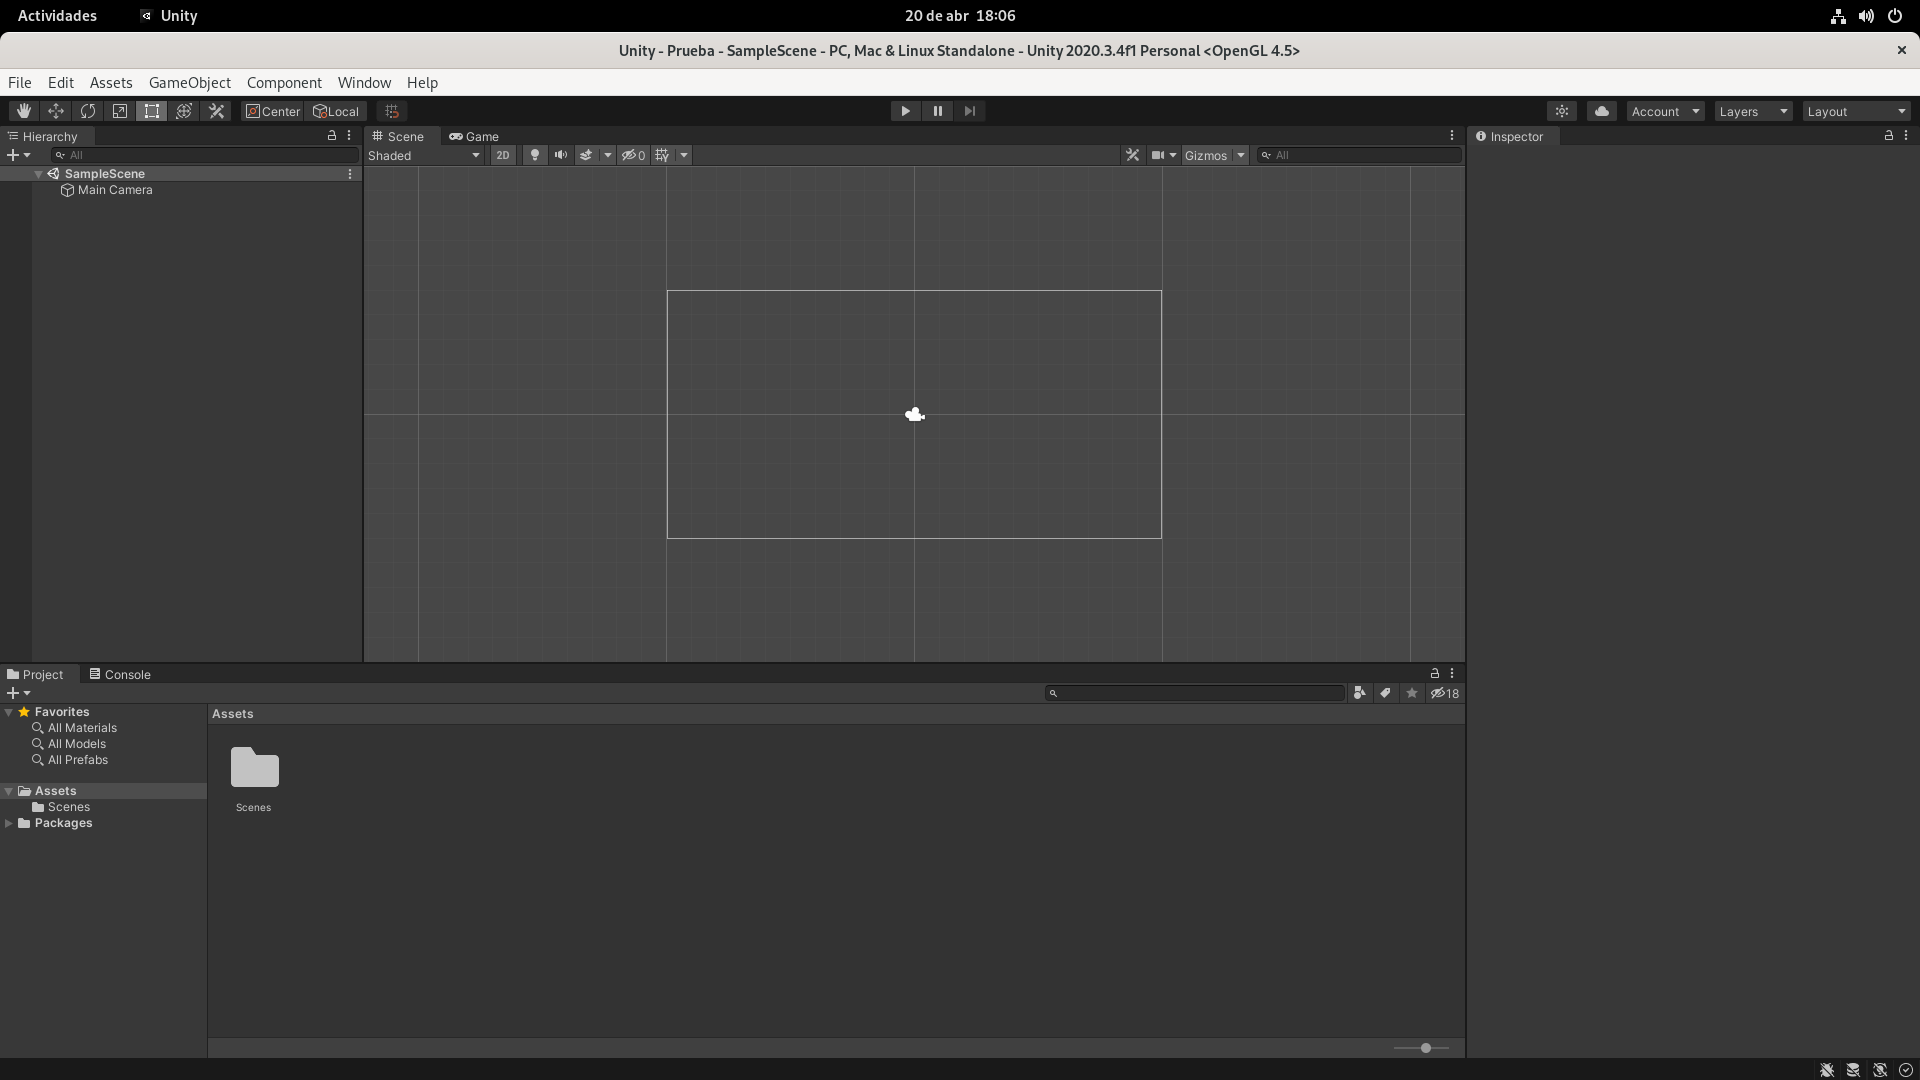 Unity Editor for Linux running